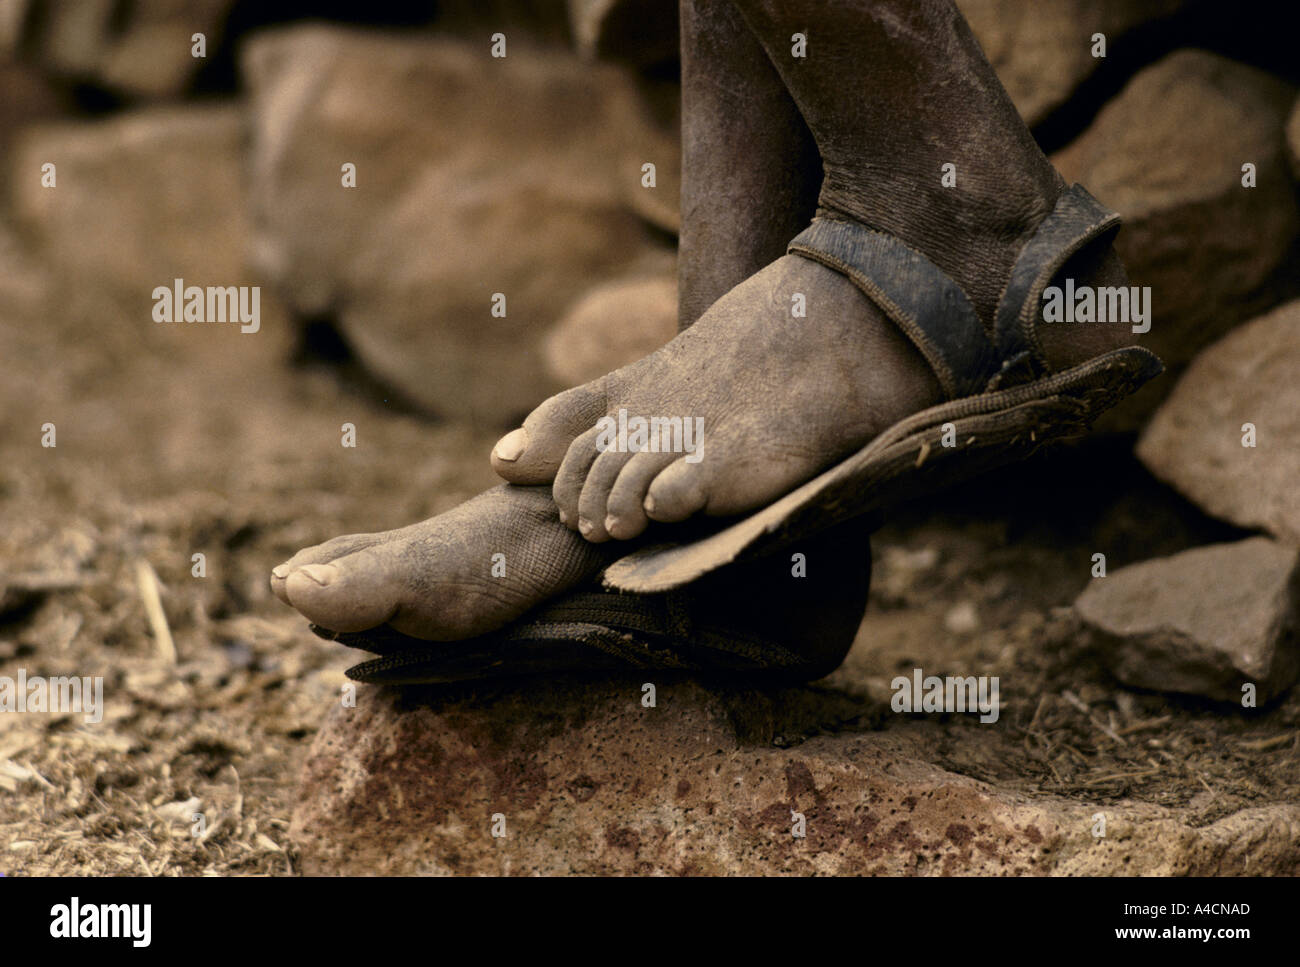 THE DAILY STRUGGLE FOR FOOD WITH THE COMING OF A NEW FAMINE, MESHAL VILLAGE, MAY 1991. DANIEL'S WORN SANDALS. Stock Photo